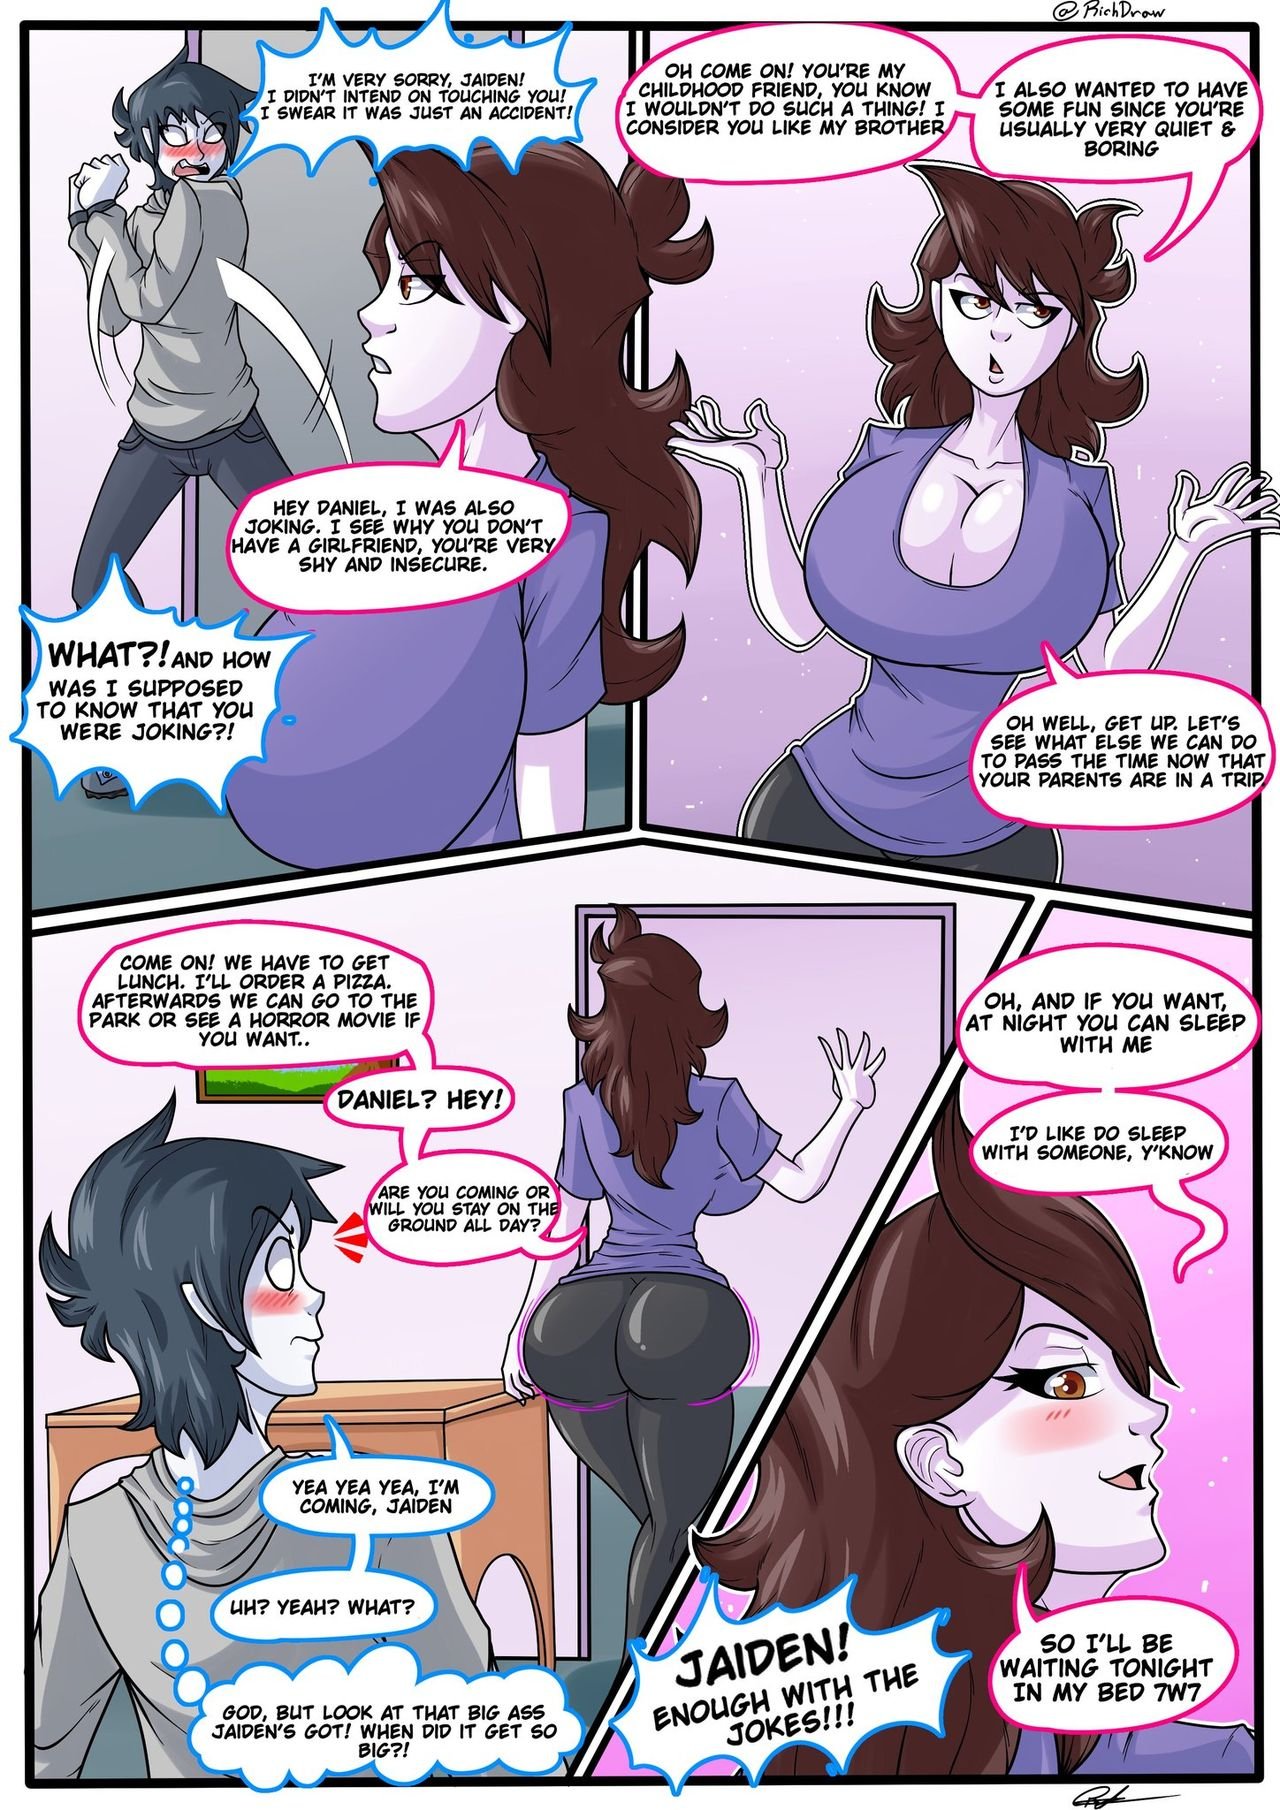 Caring For My Best Friend -Ongoing- comic porn HD Porn Comics picture